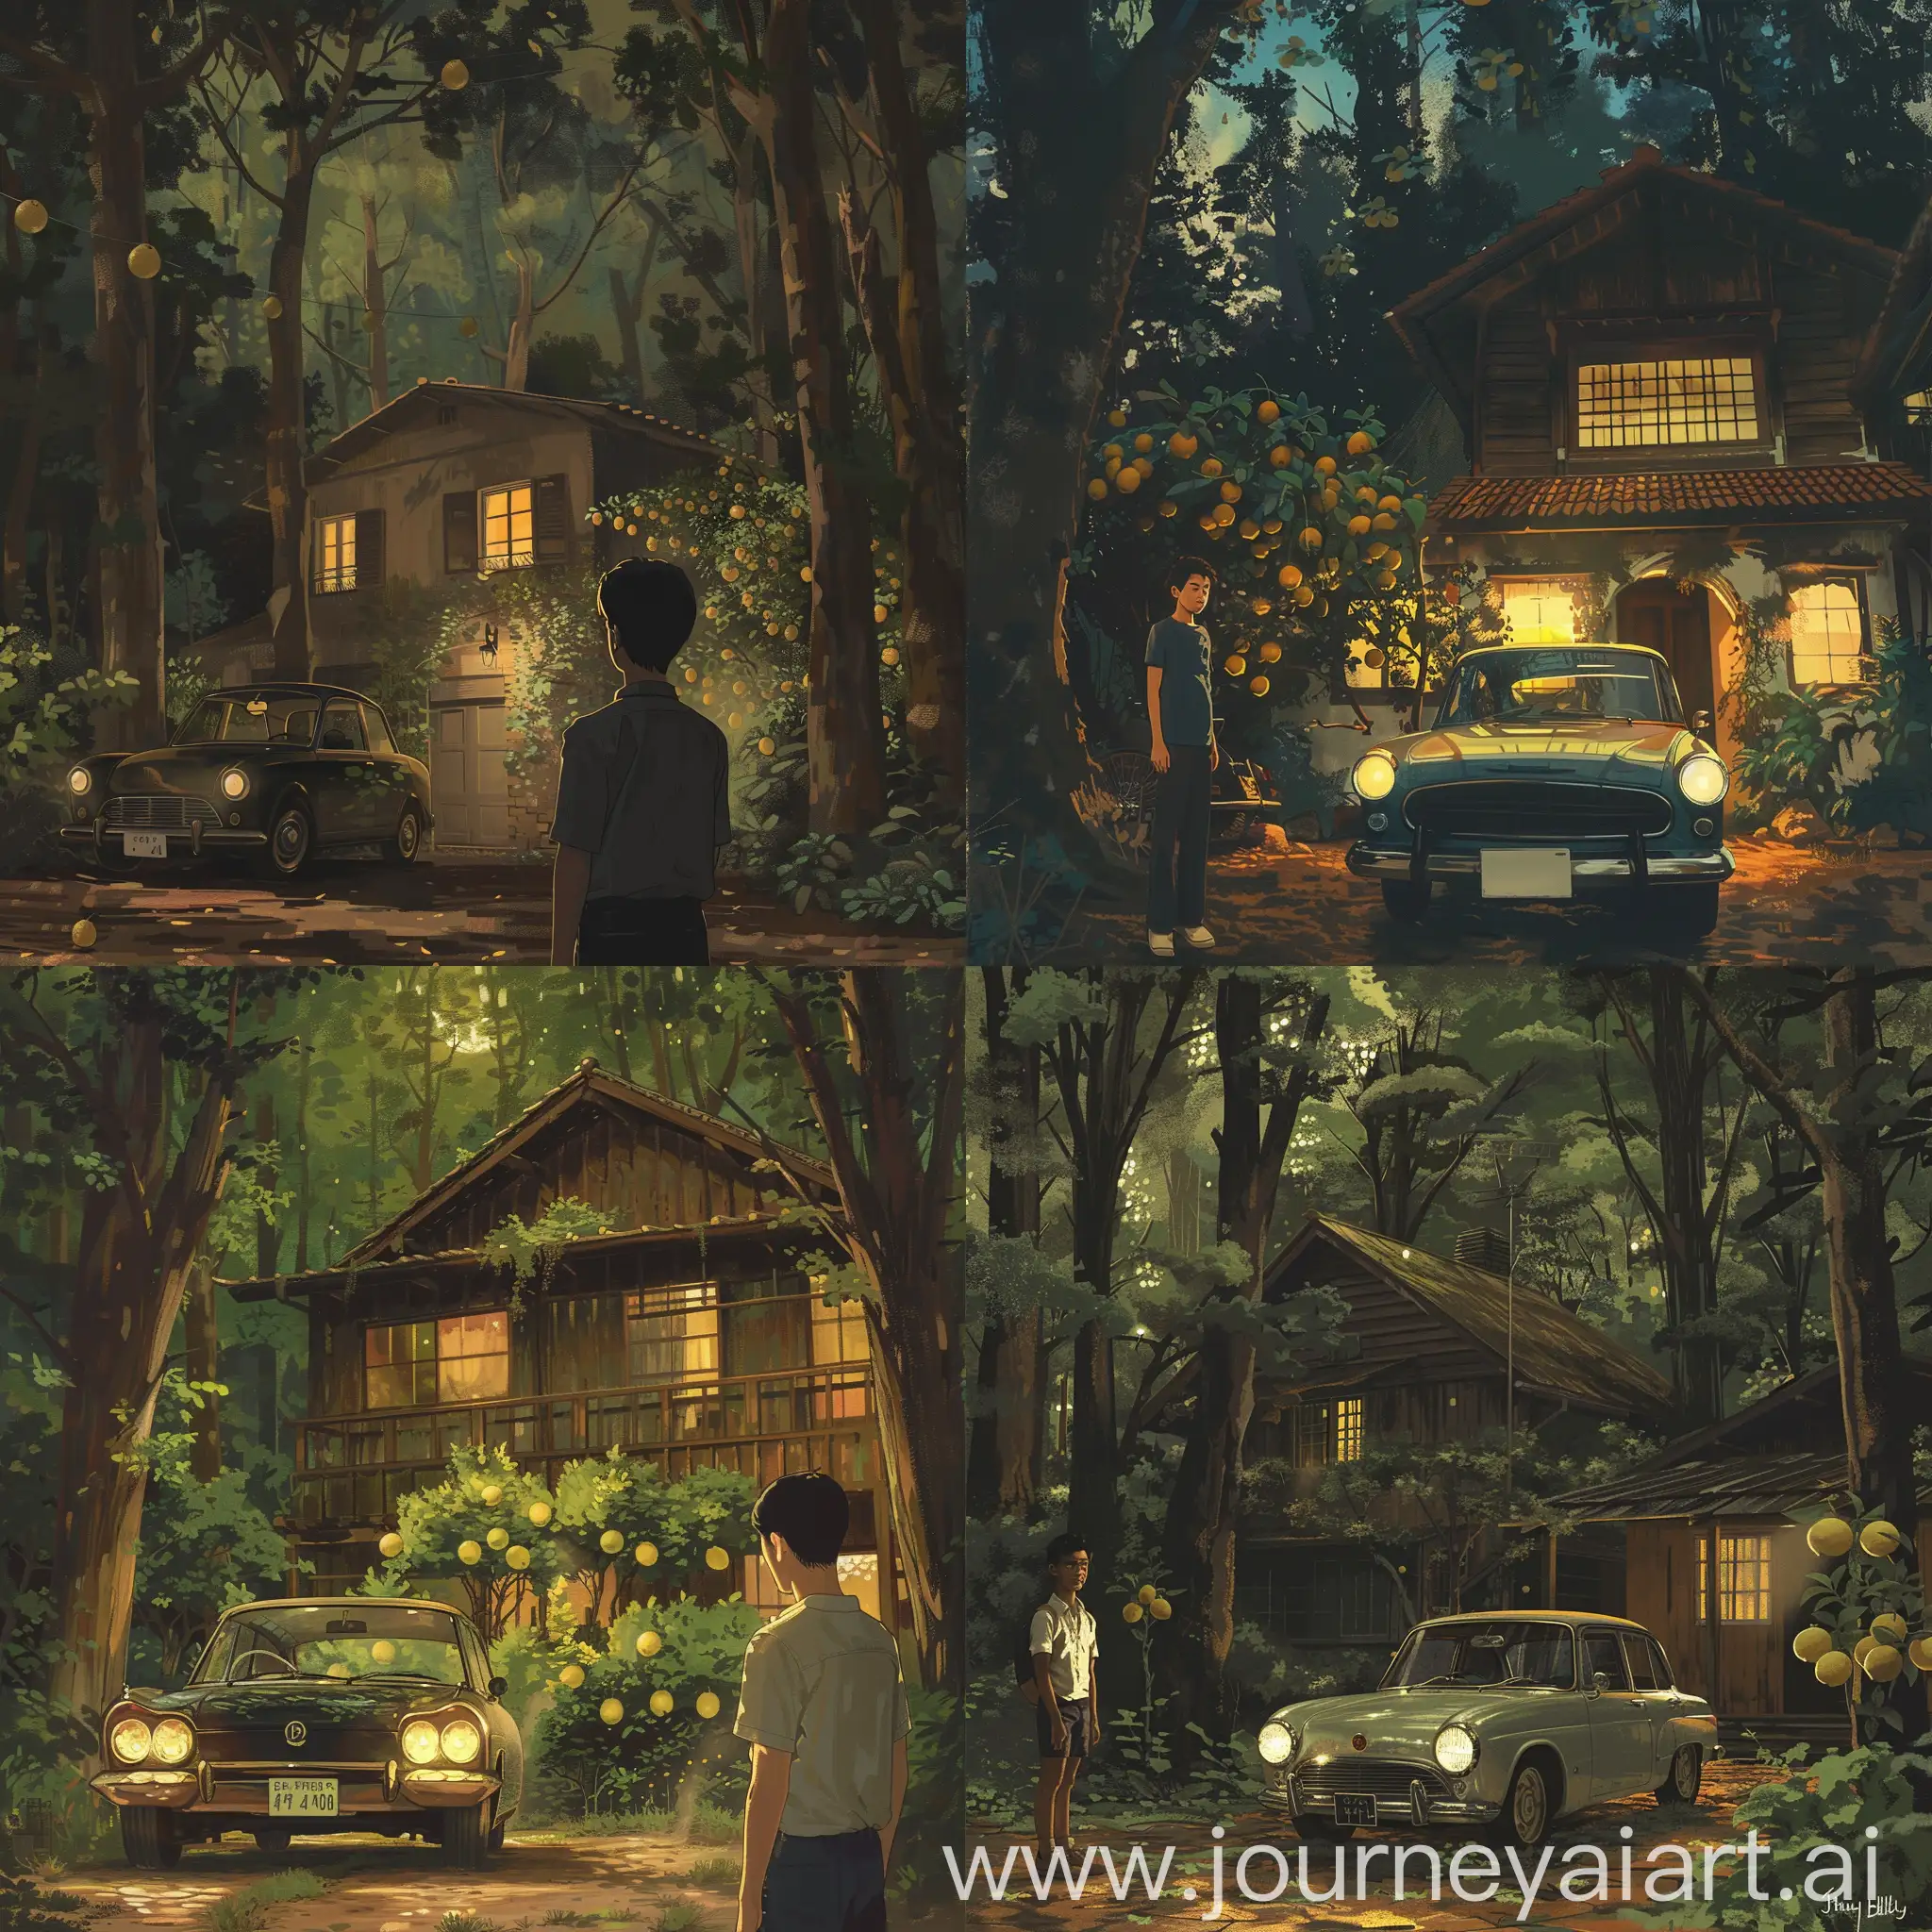 an Indonesian young man stands, Alone house in the wood , A peaceful environment, natural vibes, lemon trees side of the house,Evening time,A vintage car parking front of house with headlights on, Studio Ghibli anime style artwork